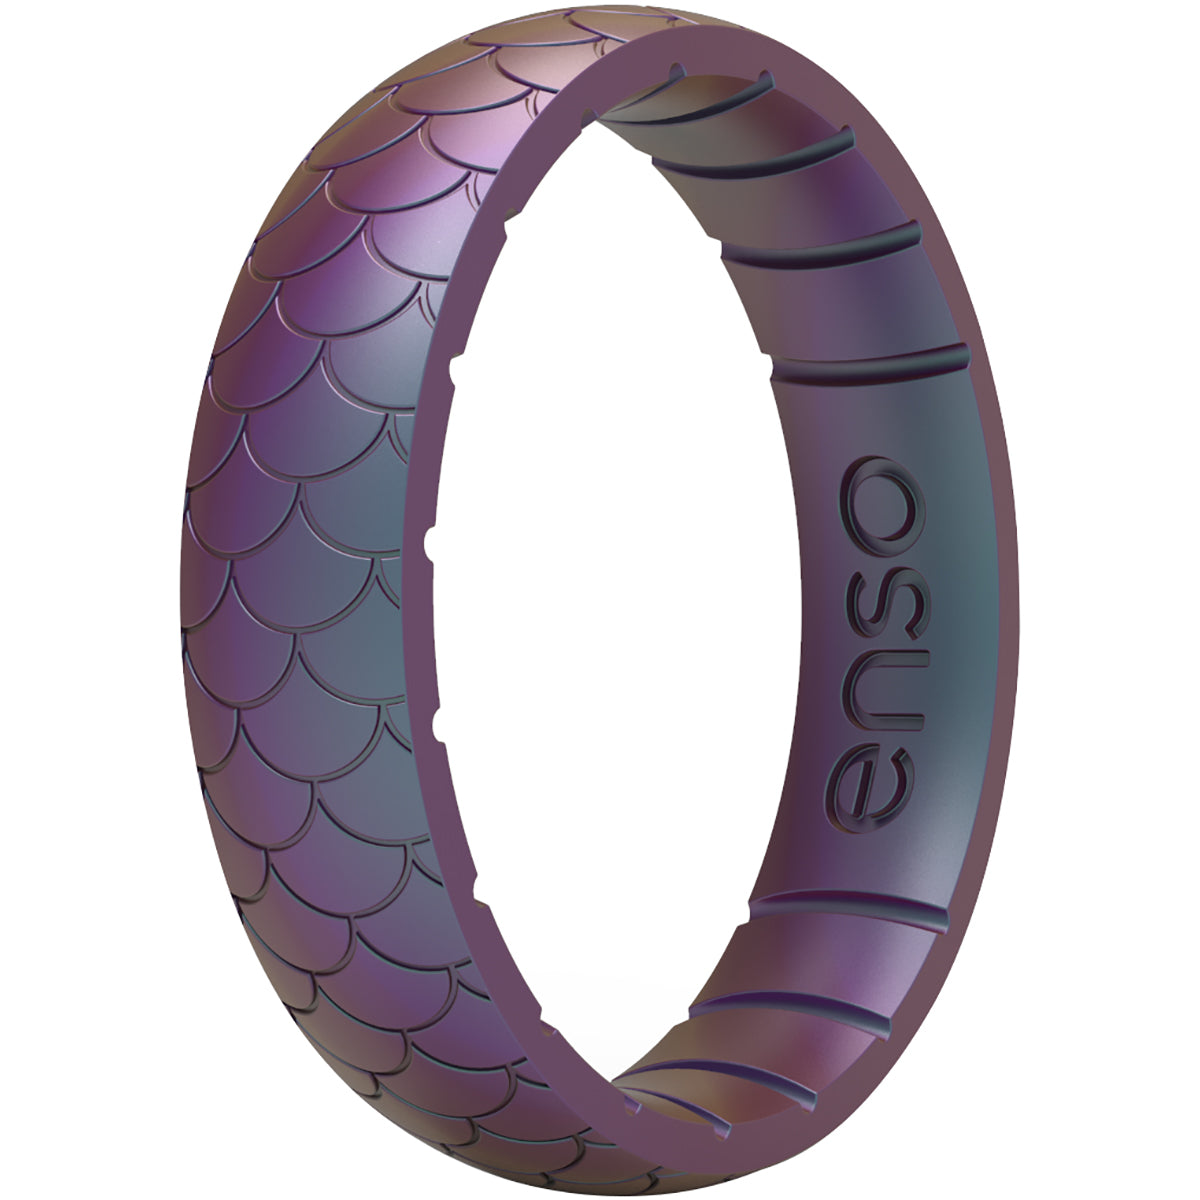 Enso Rings Thin Etched Legends Series Silicone Ring - 7 - Mermaid Scale Enso Rings